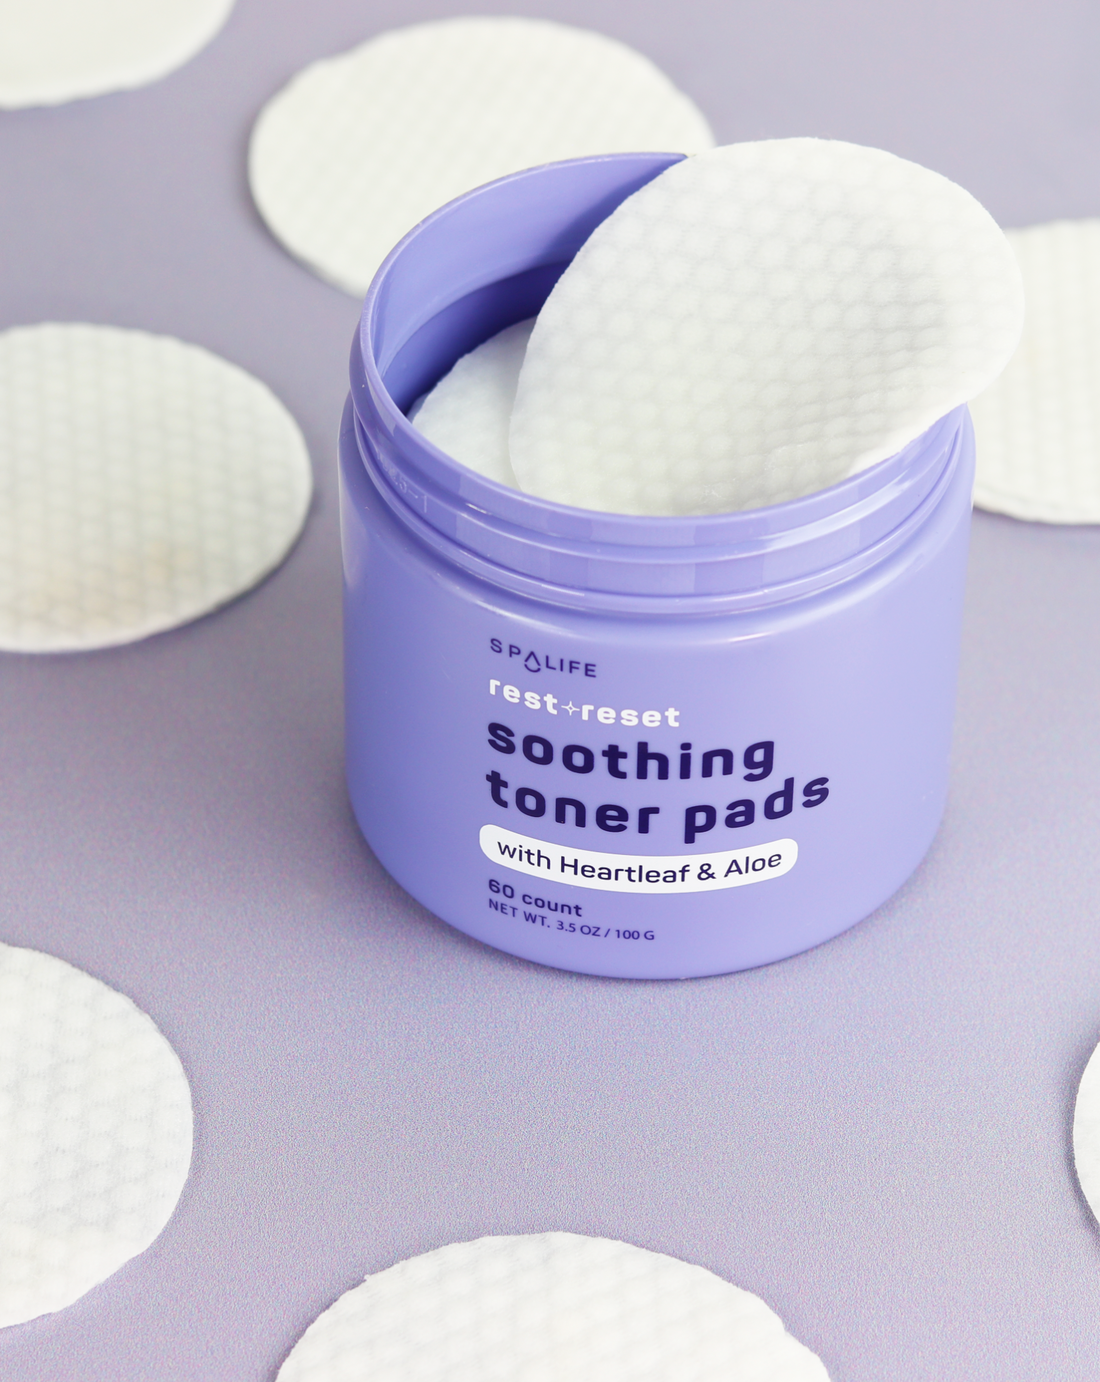 Rest & Reset Soothing Toner Pads – SpaLife